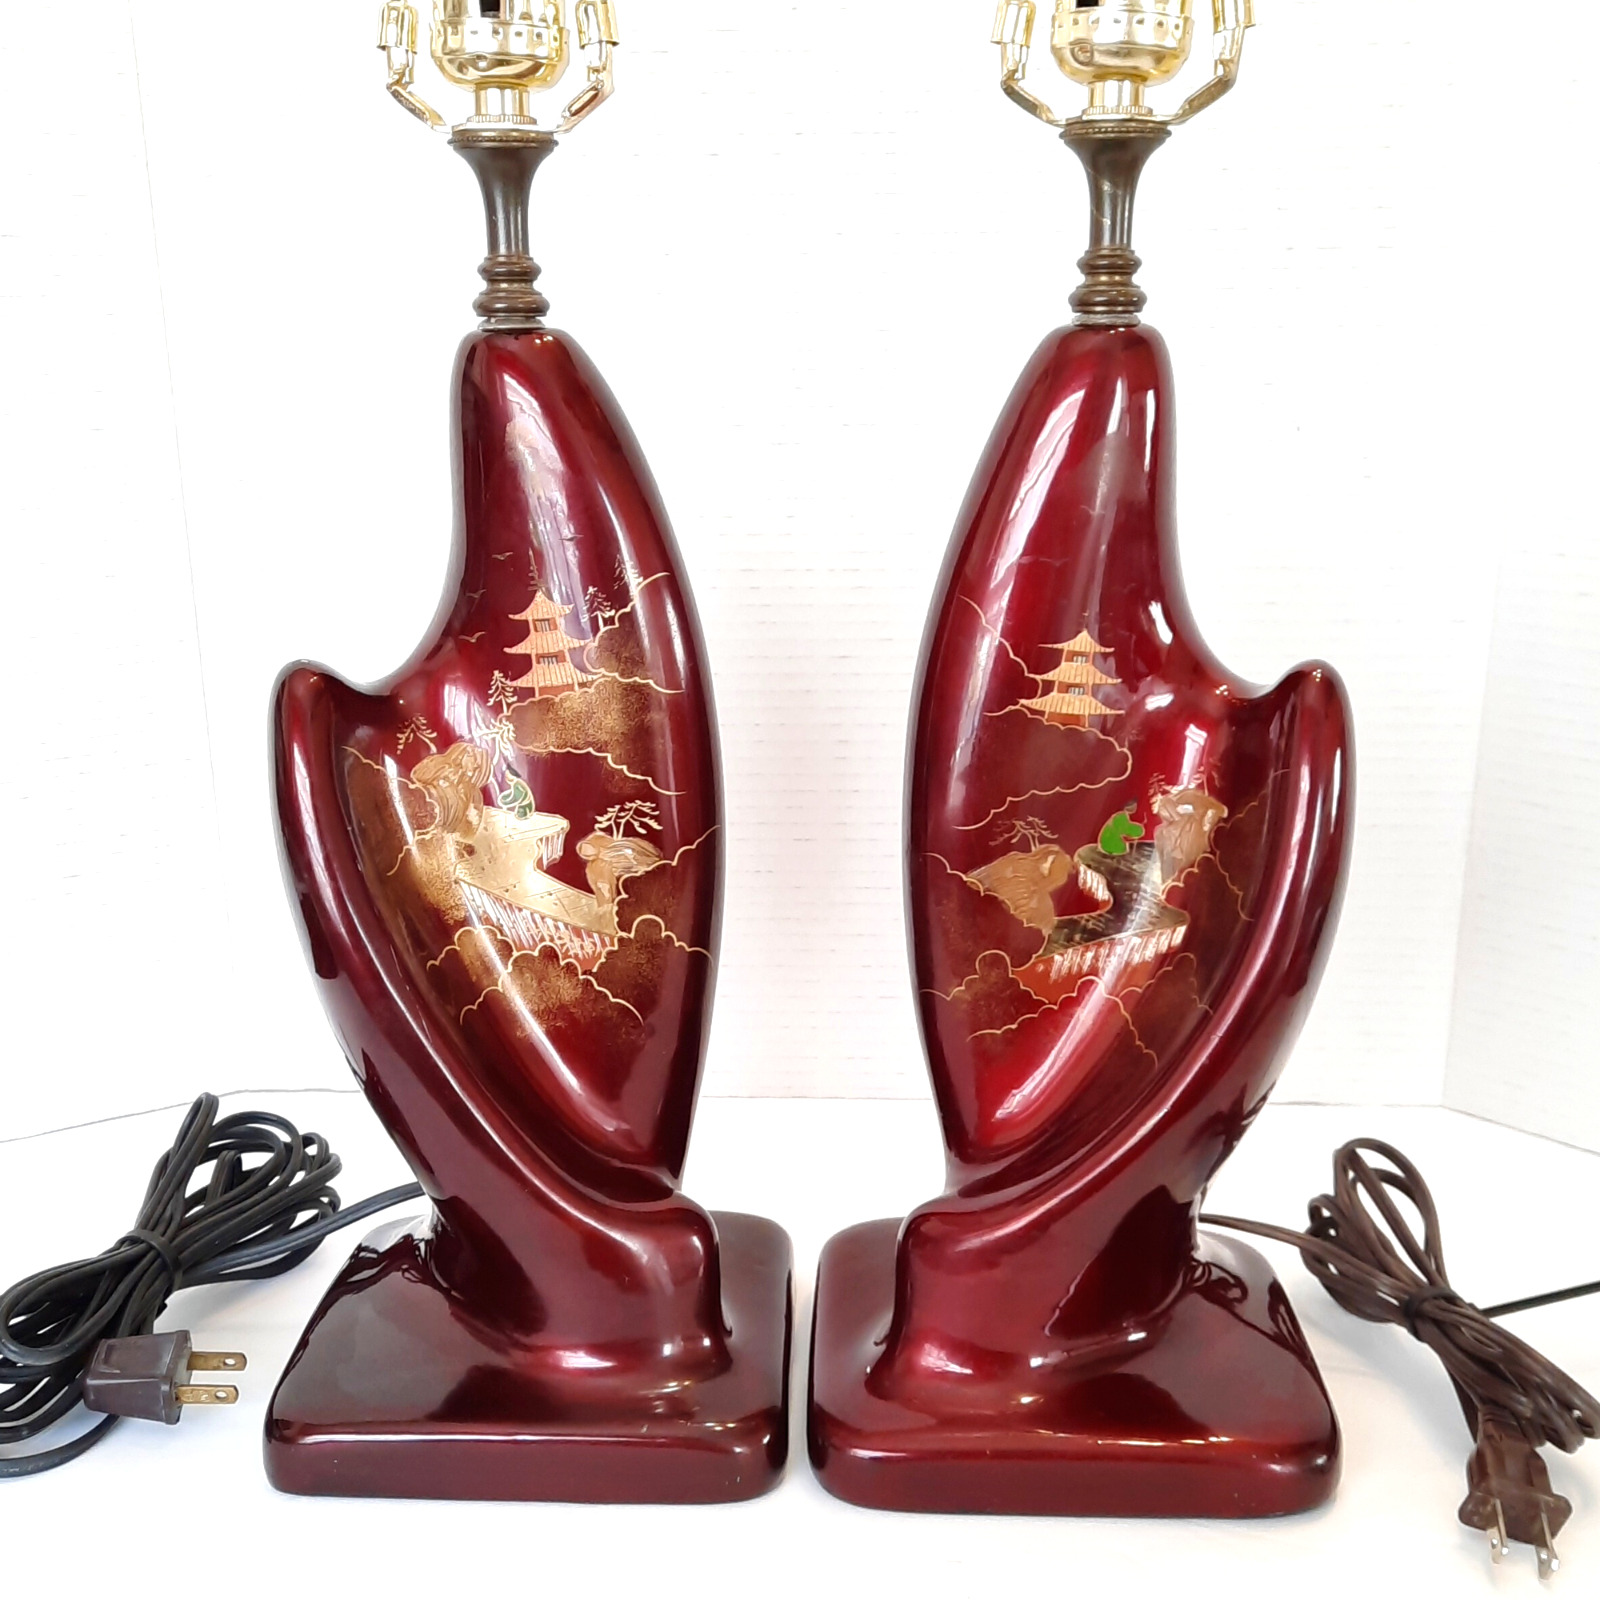 Japanese MCM Red Lacquer Lamps Pair RARE Vintage GrannyCore Handpainted WORKING